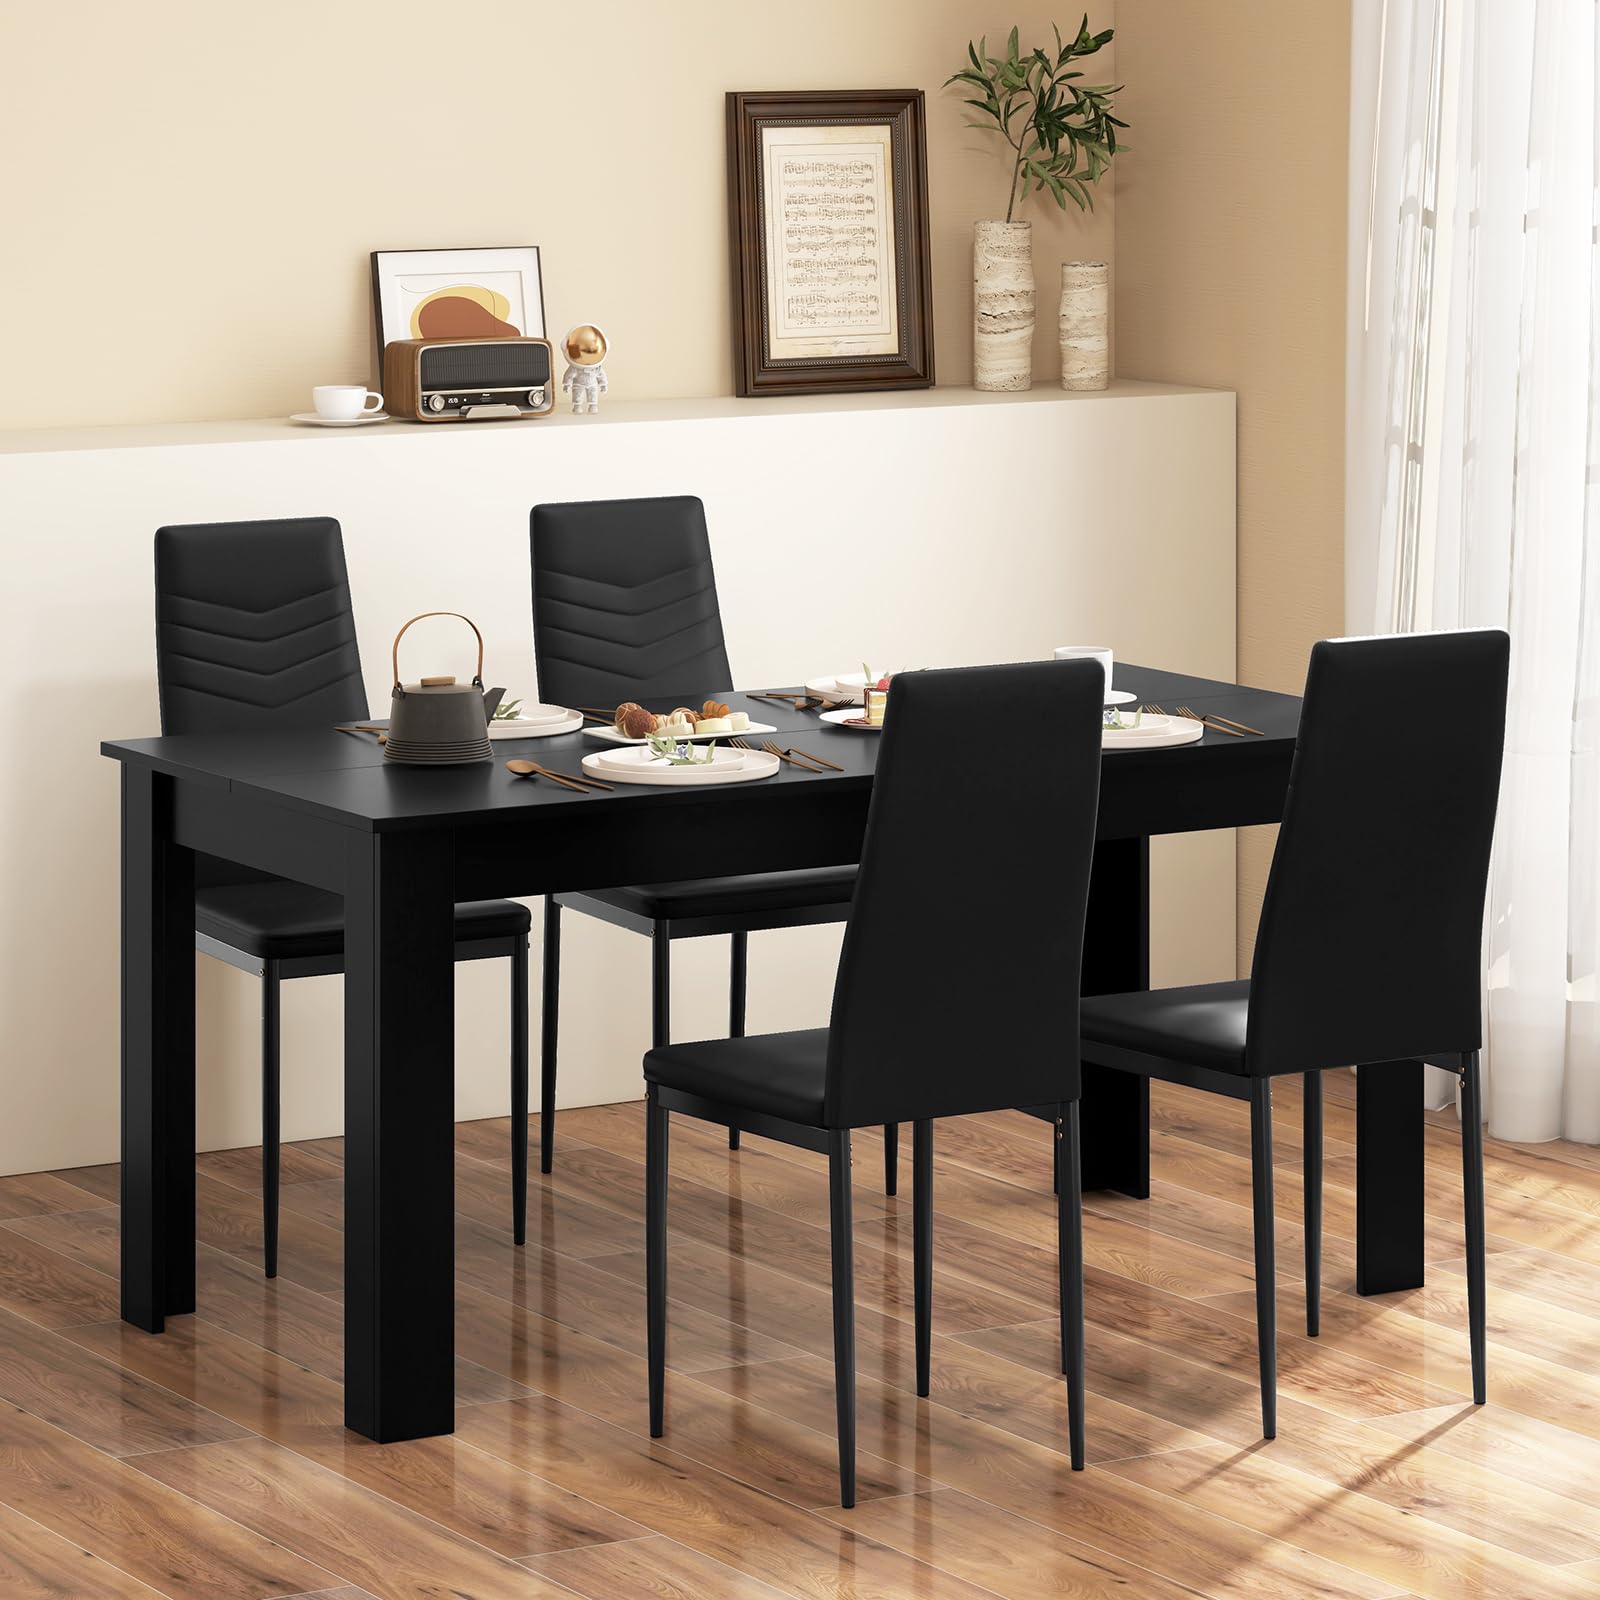 Giantex Dining Table Set for 4 or 8, Modern Rectangular Kitchen Table Set w/ PVC Leather Dining Chairs